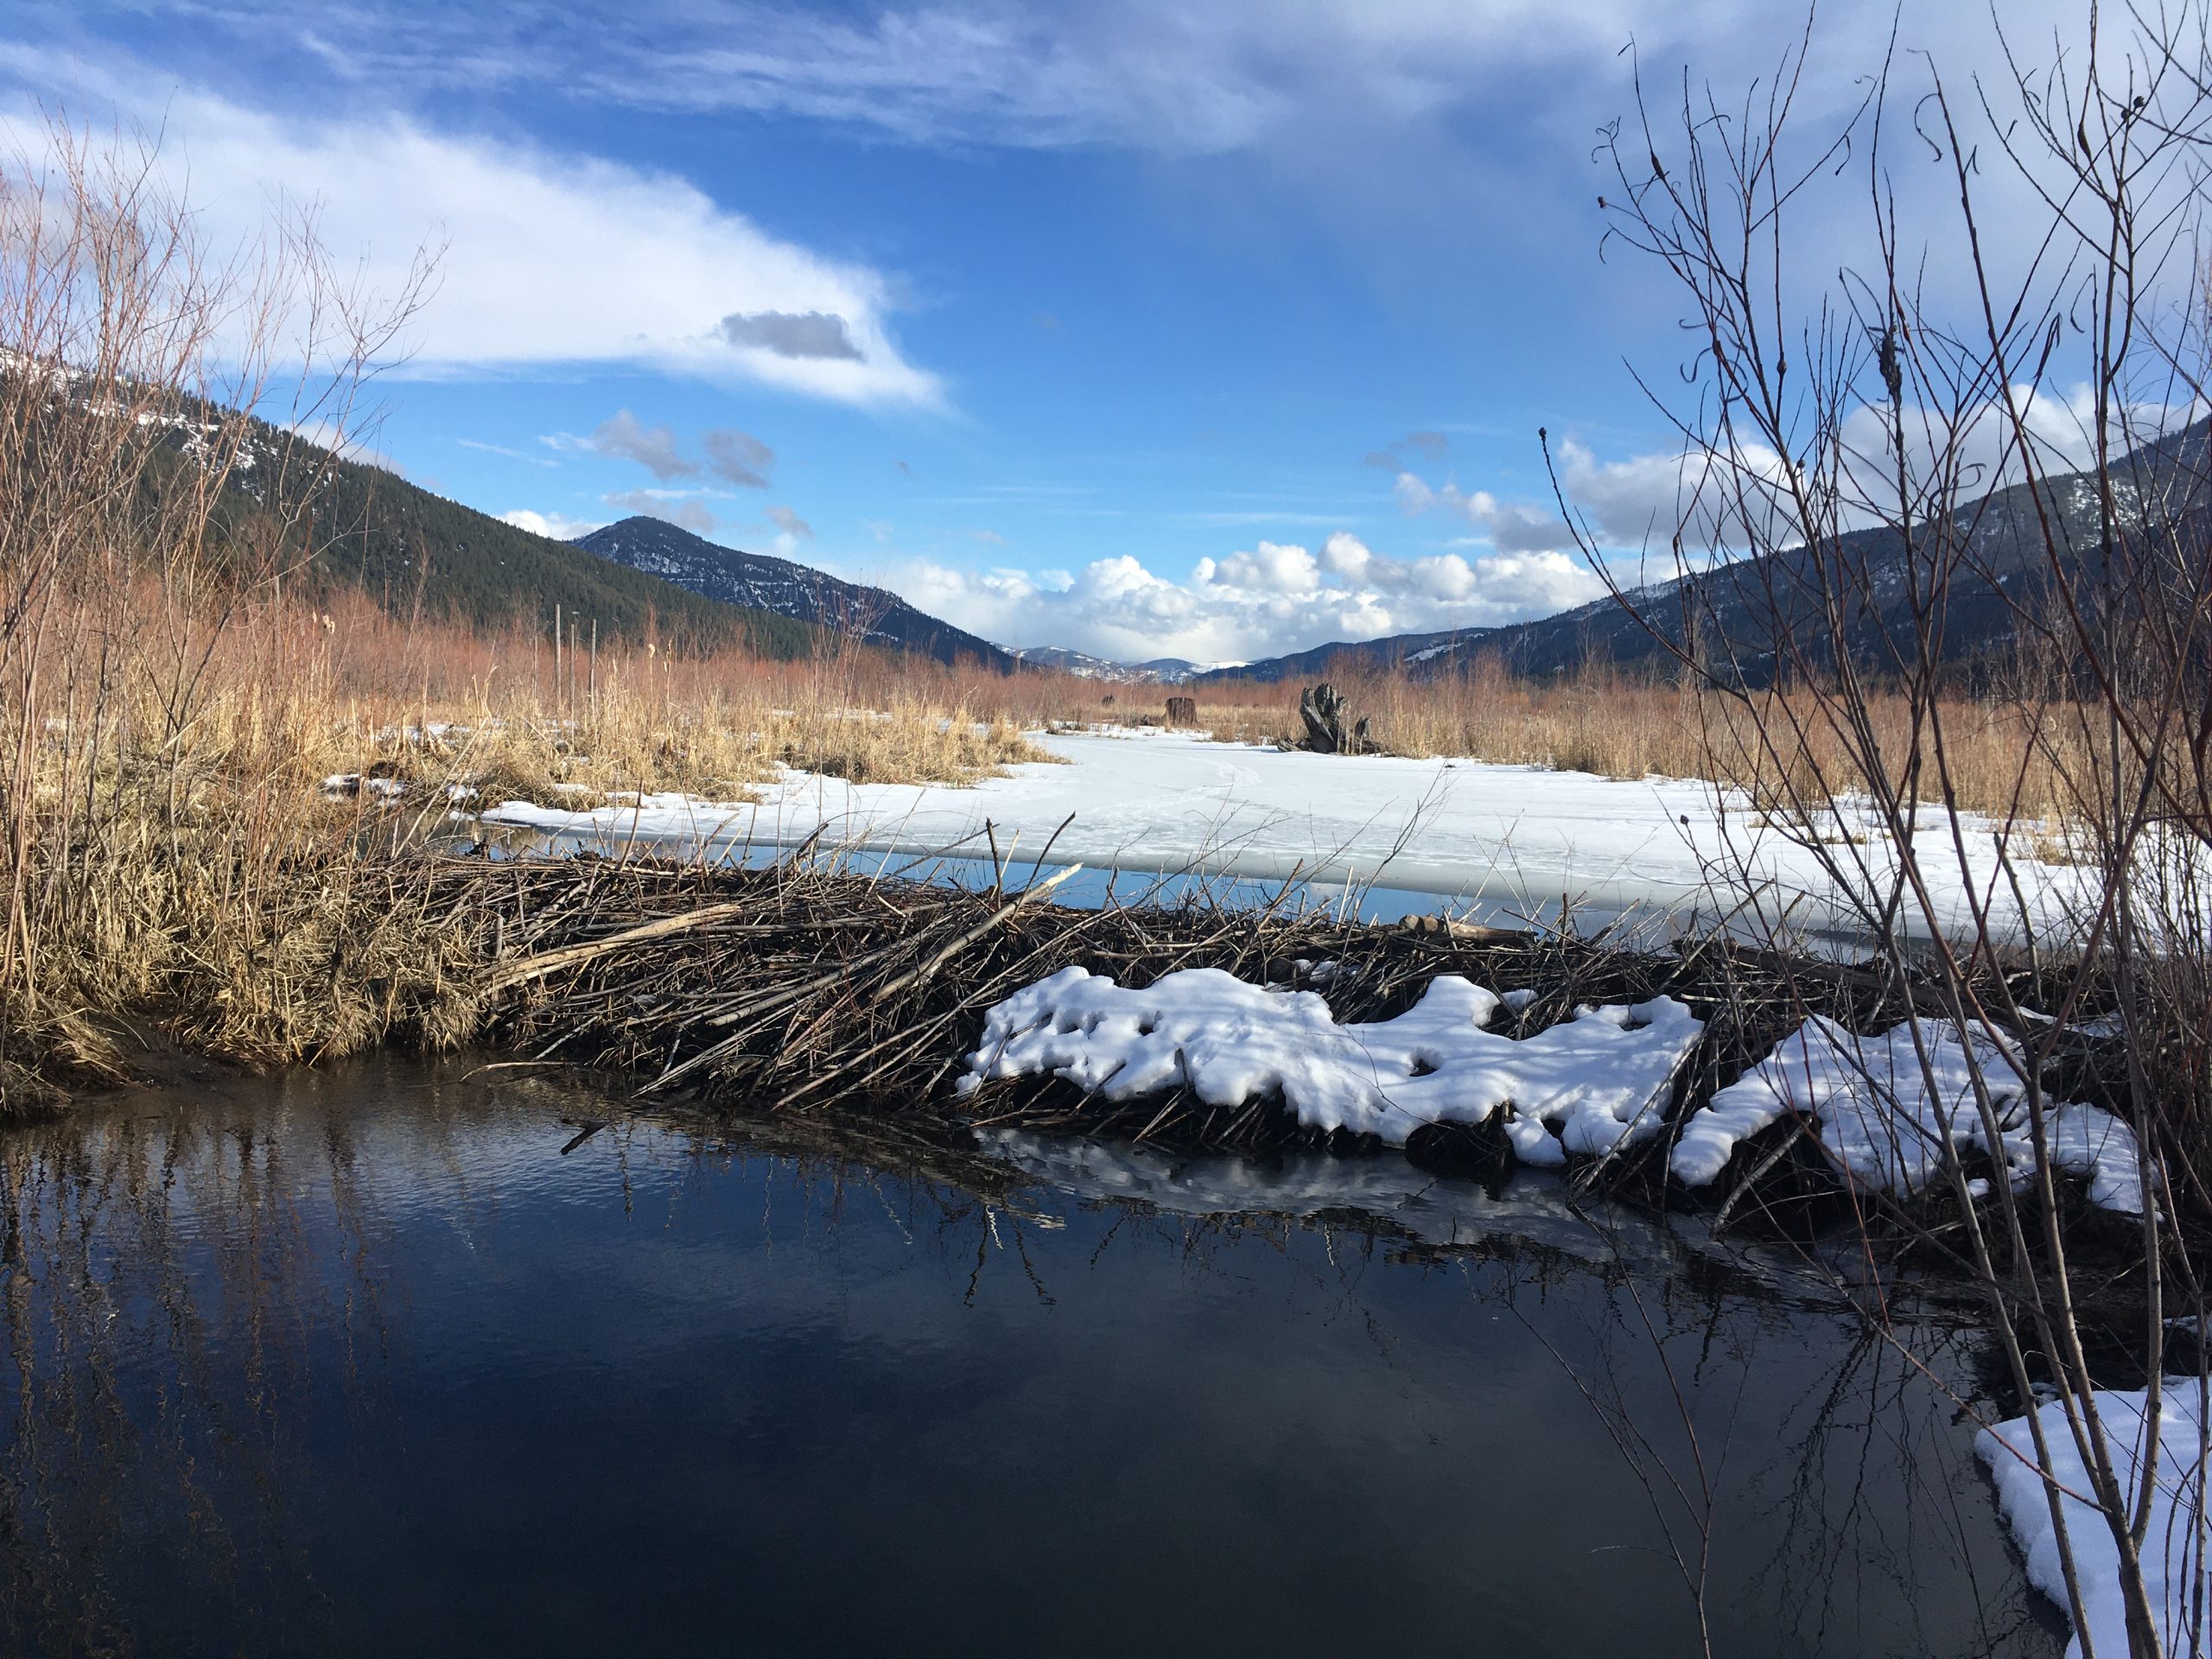 In the recovering floodplain of the Clark Fork River, the makers, methods, and materials of this dam offer hope for the next century, and beyond. (Photo Credit: Rob Rich)